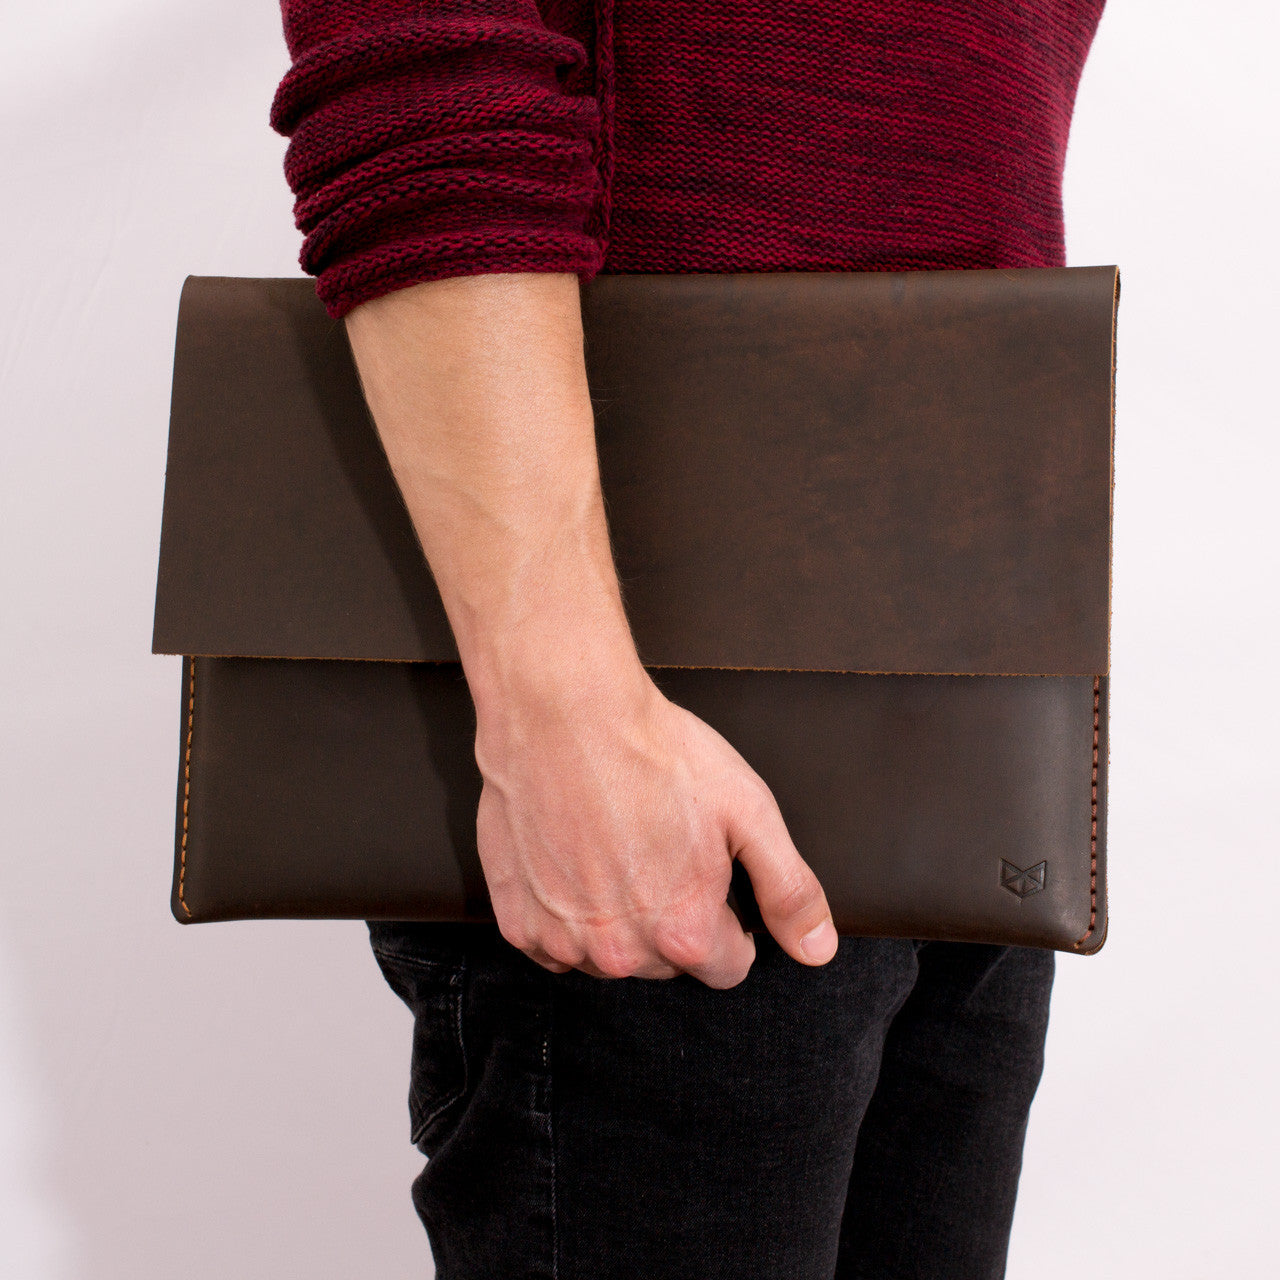 Carrying the new Dell XPS 13" 15" leather sleeve